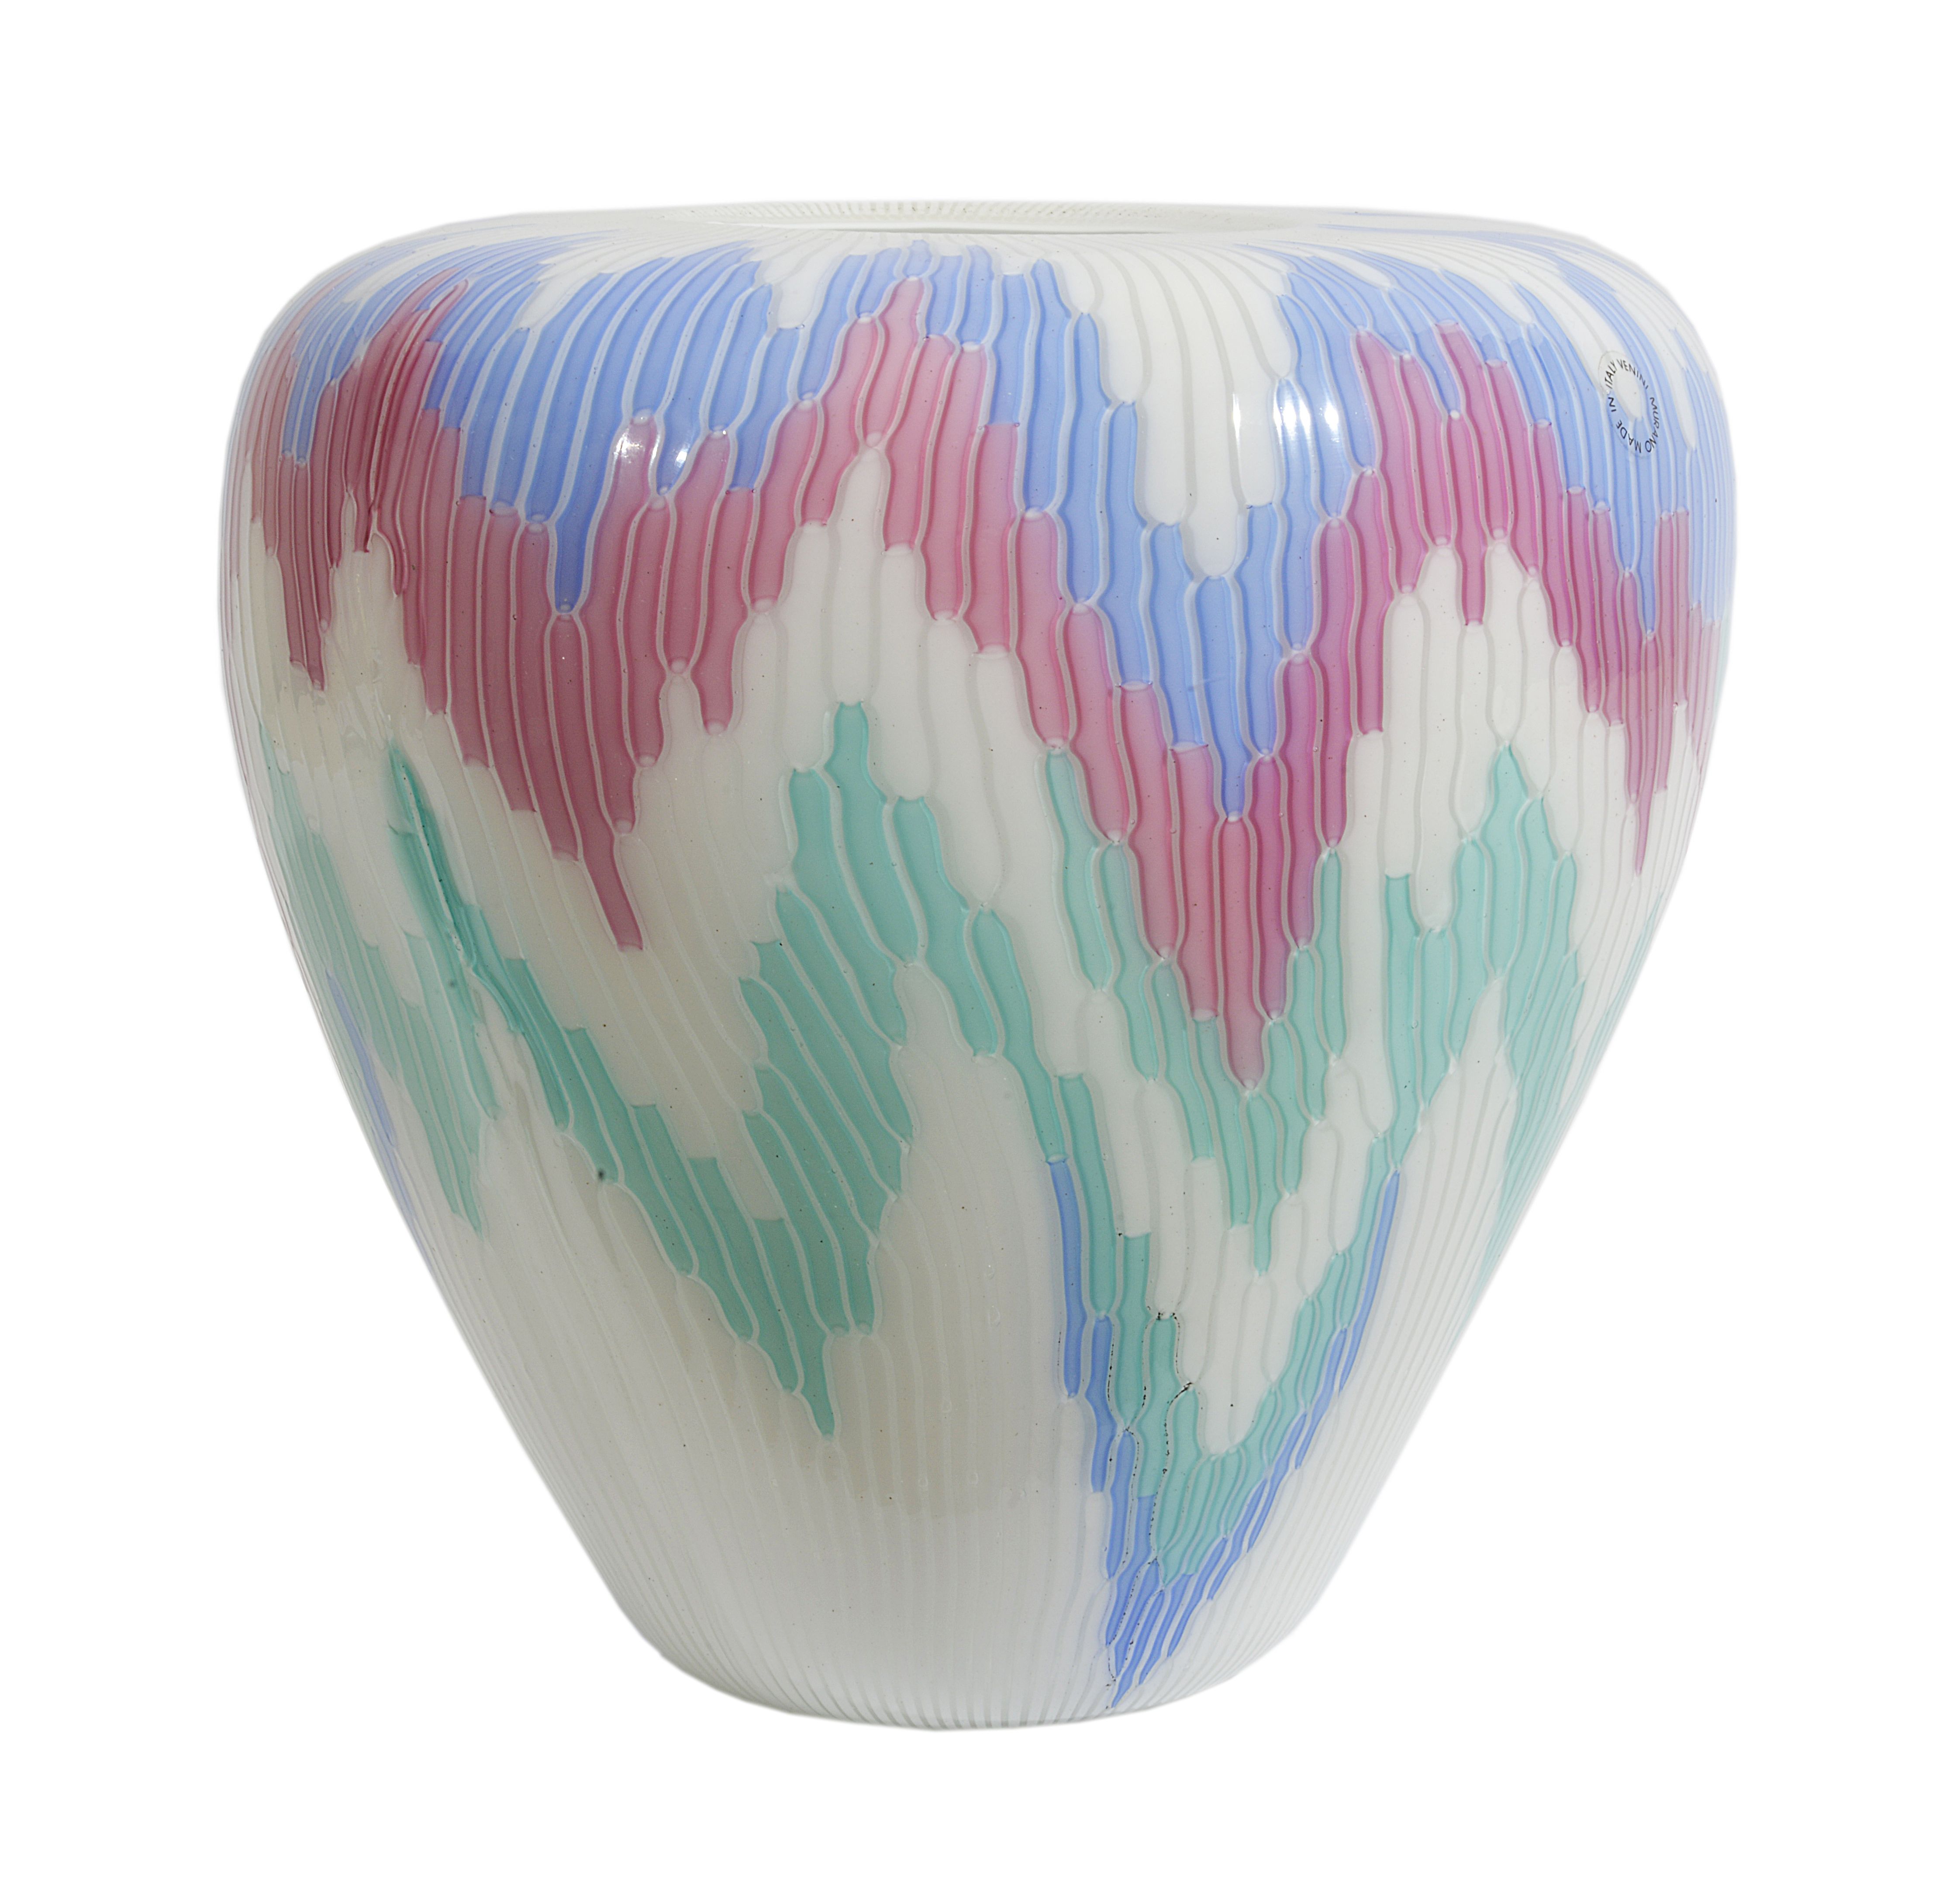 Barbara del Vicario for Venini
'Fiamme series'
with polychrome cane decoration. opaque vase with